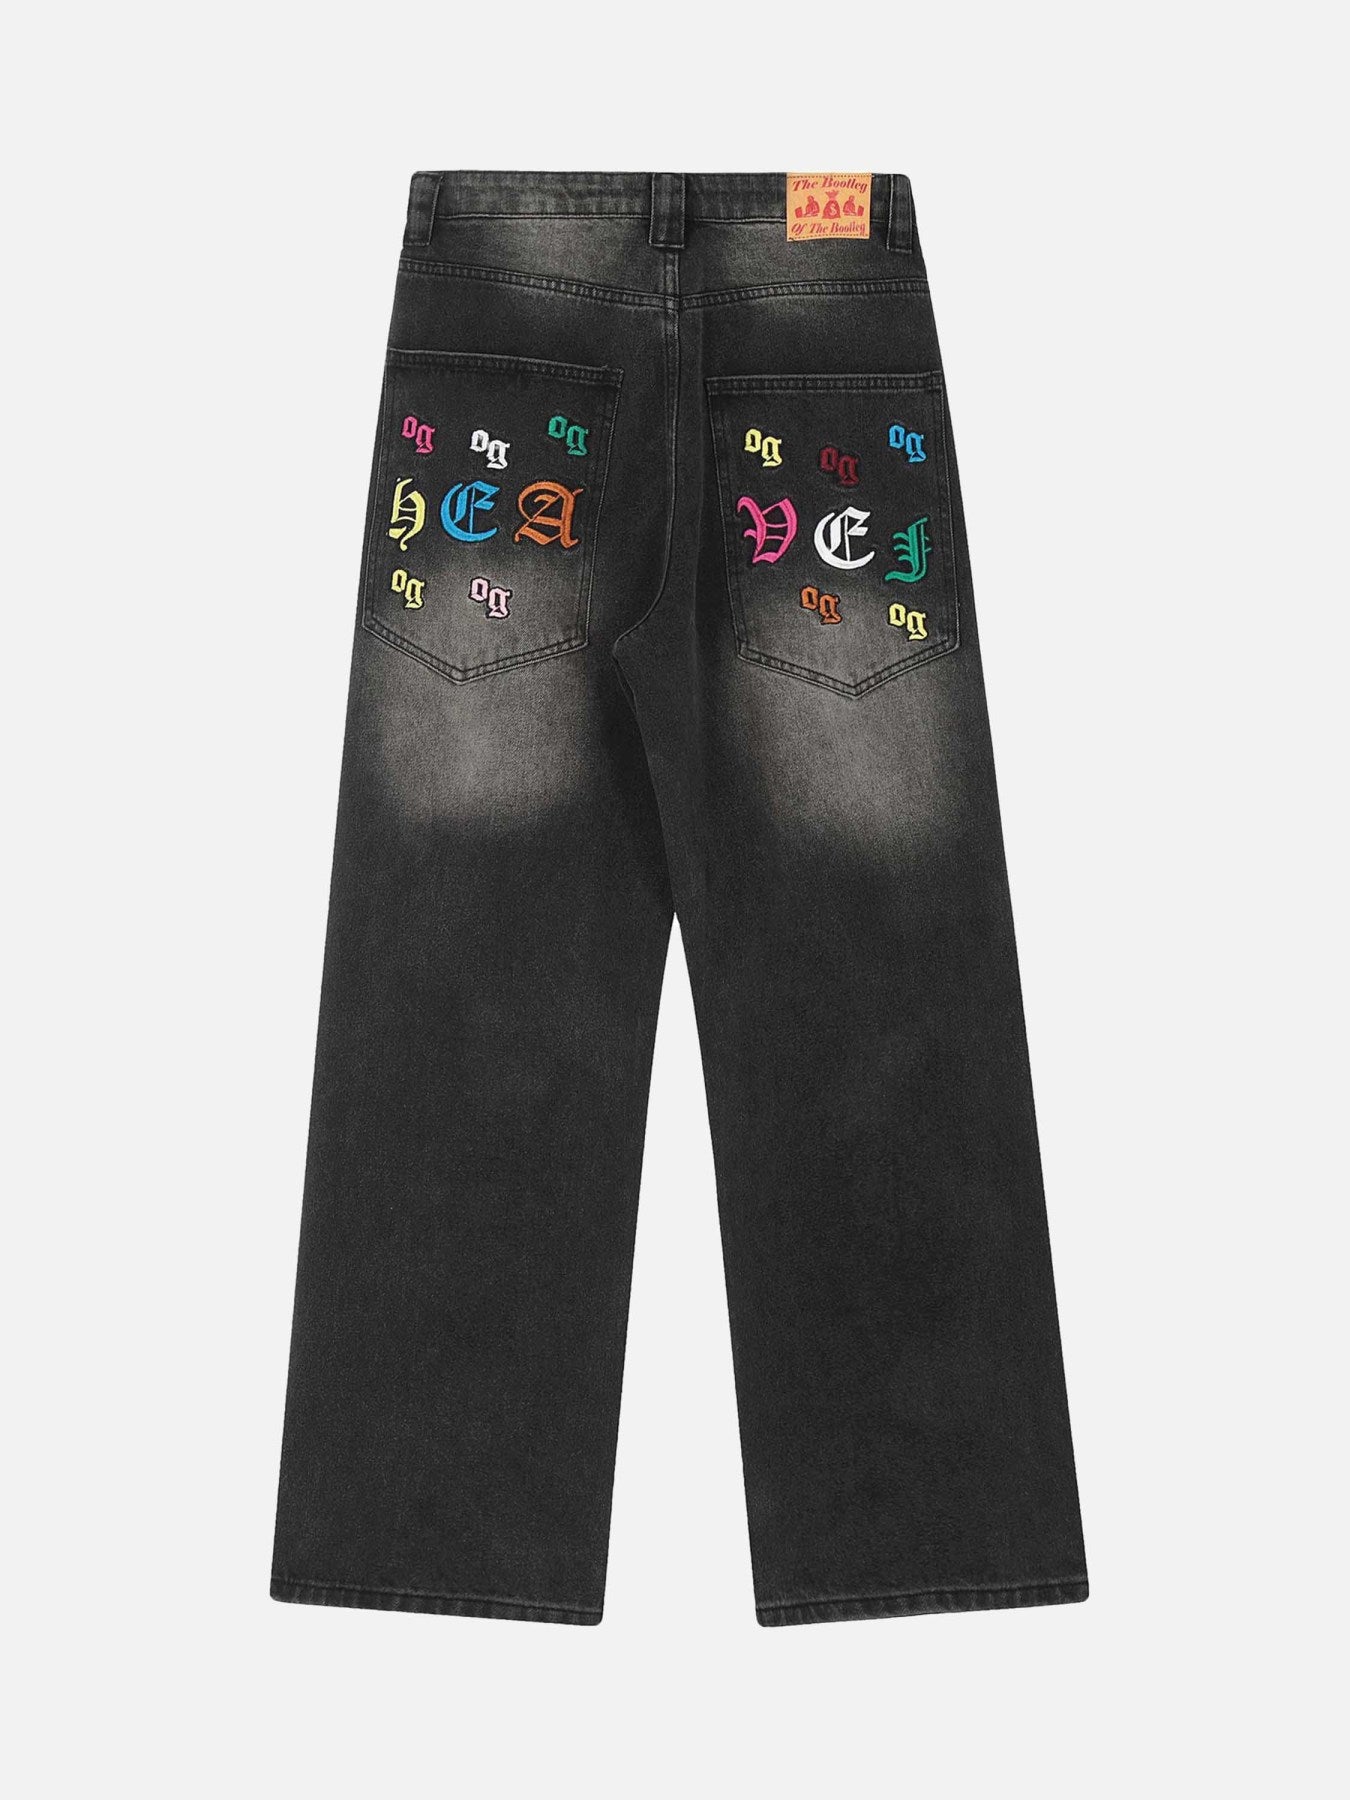 Thesupermade American Gothic Letter Embroidered Jeans